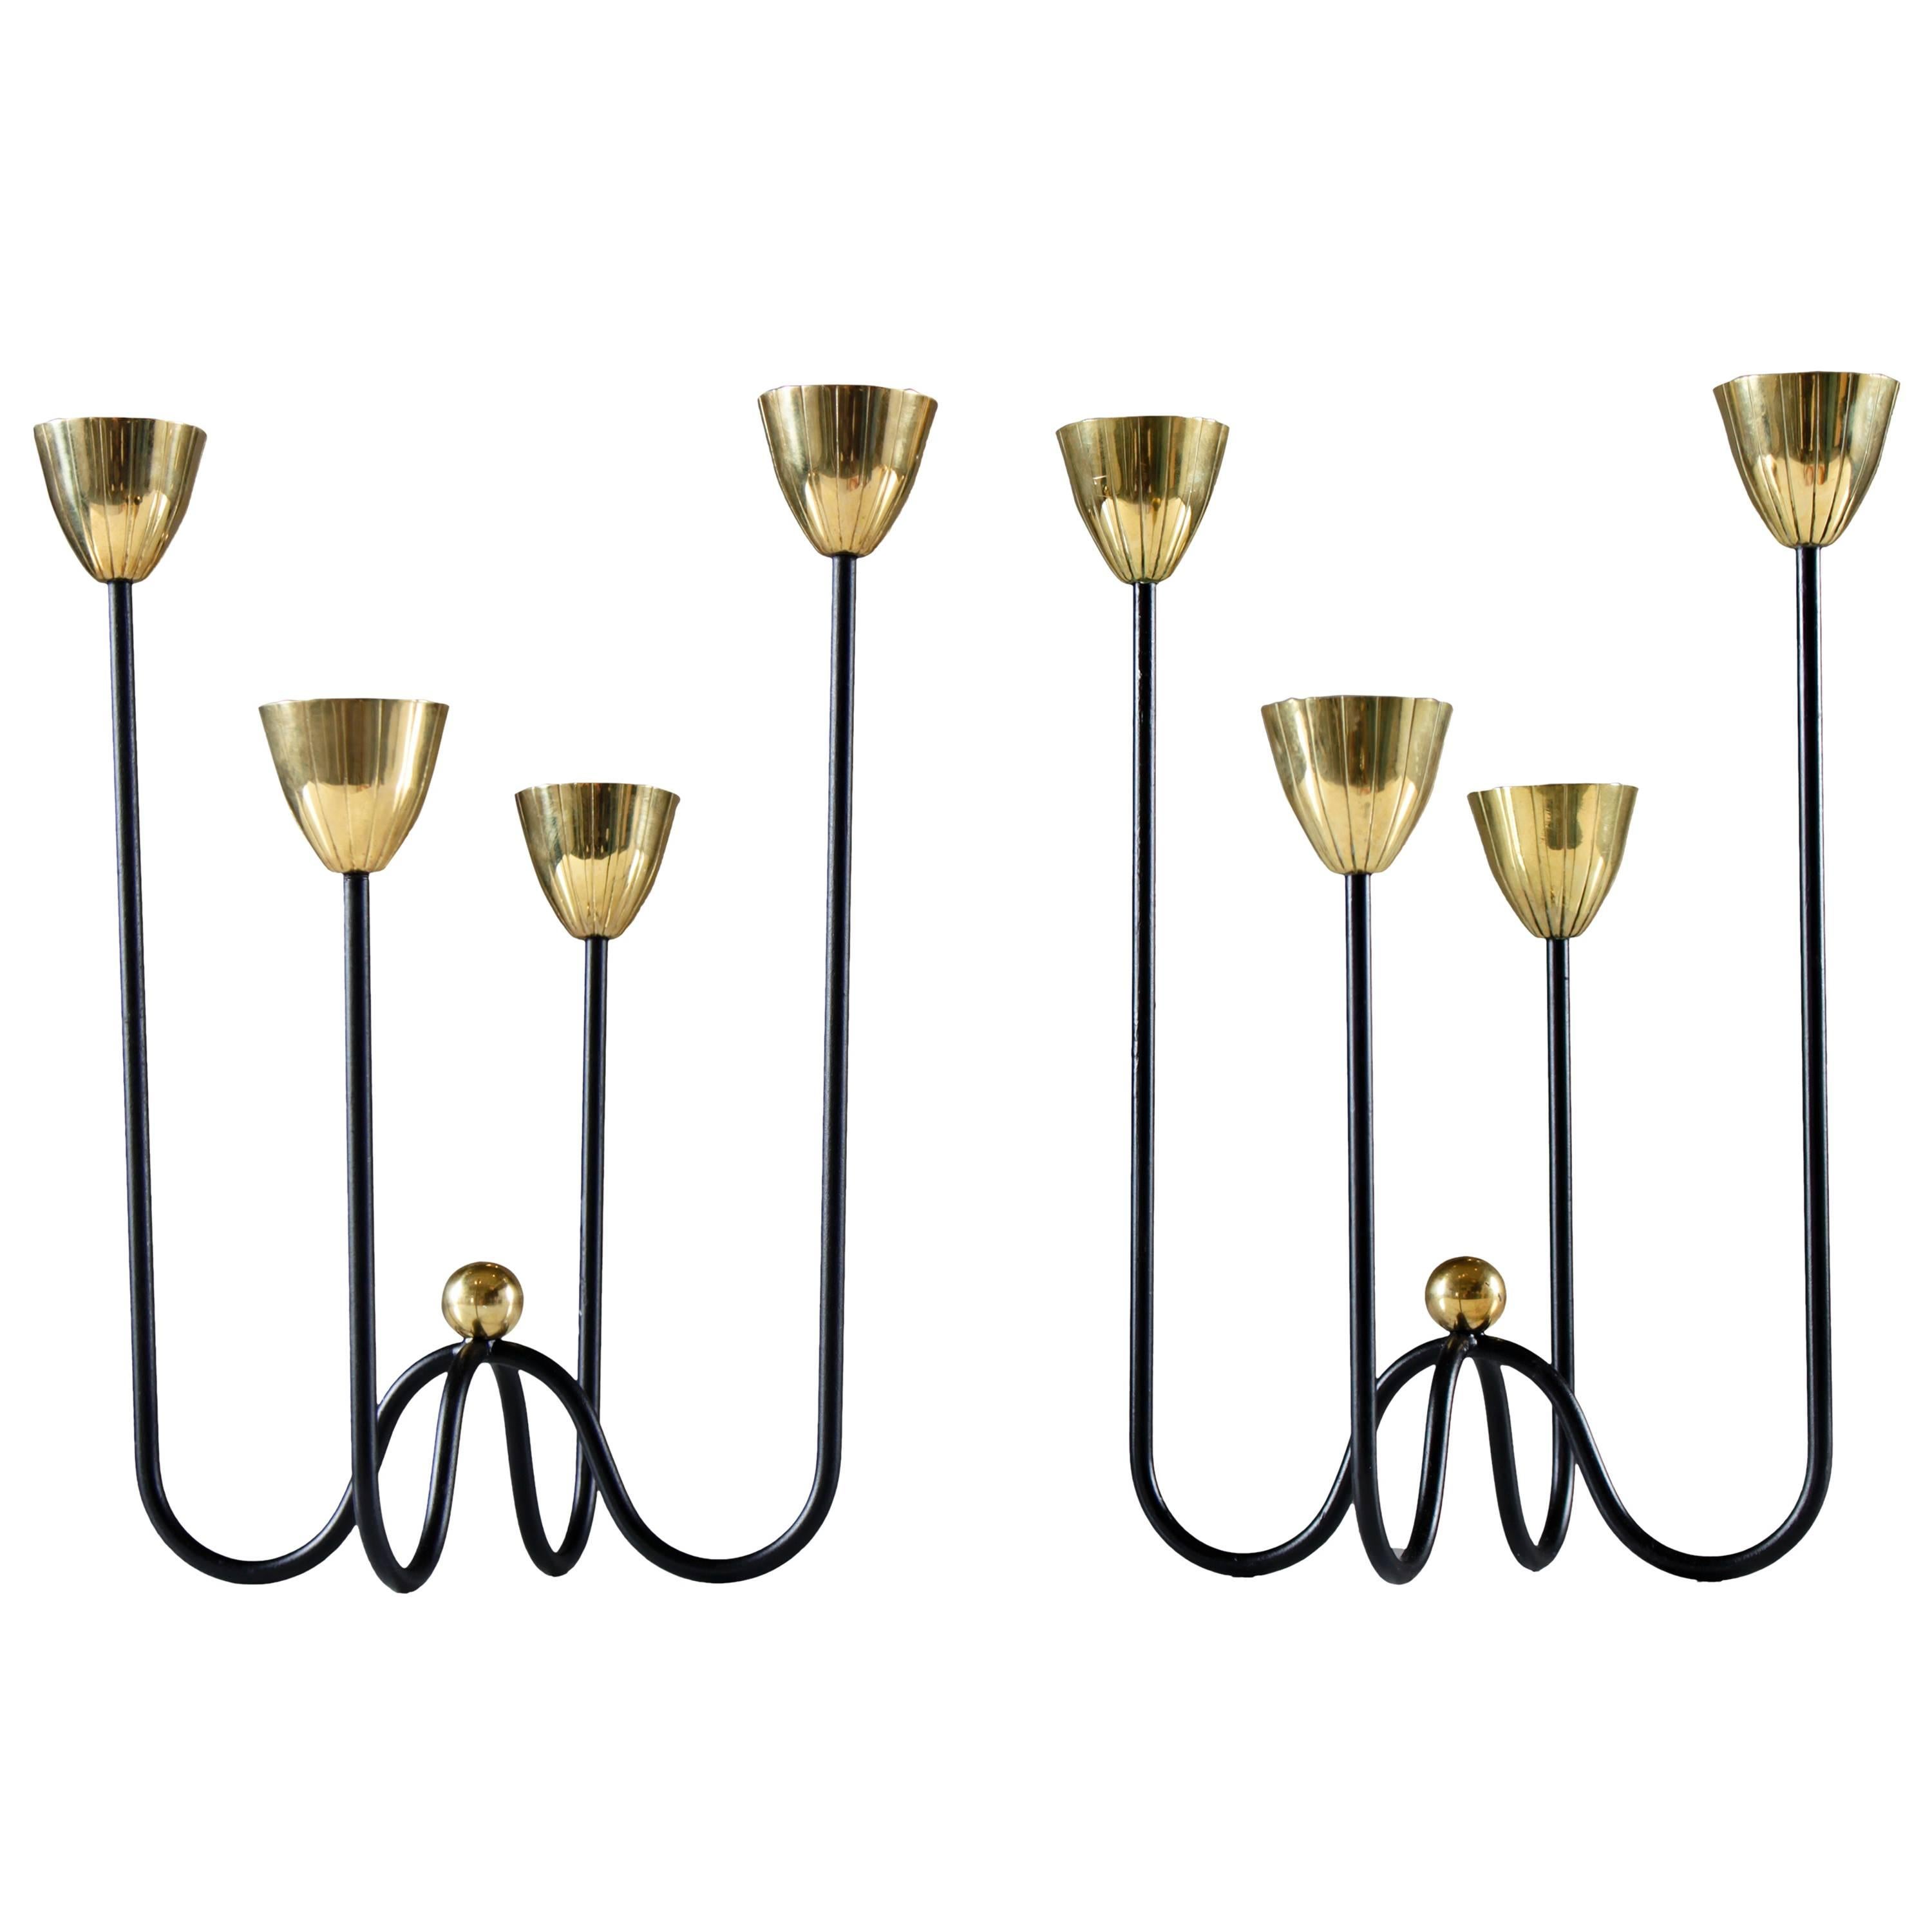 Pair of Candelabra by Gunnar Ander for Ystad Metall